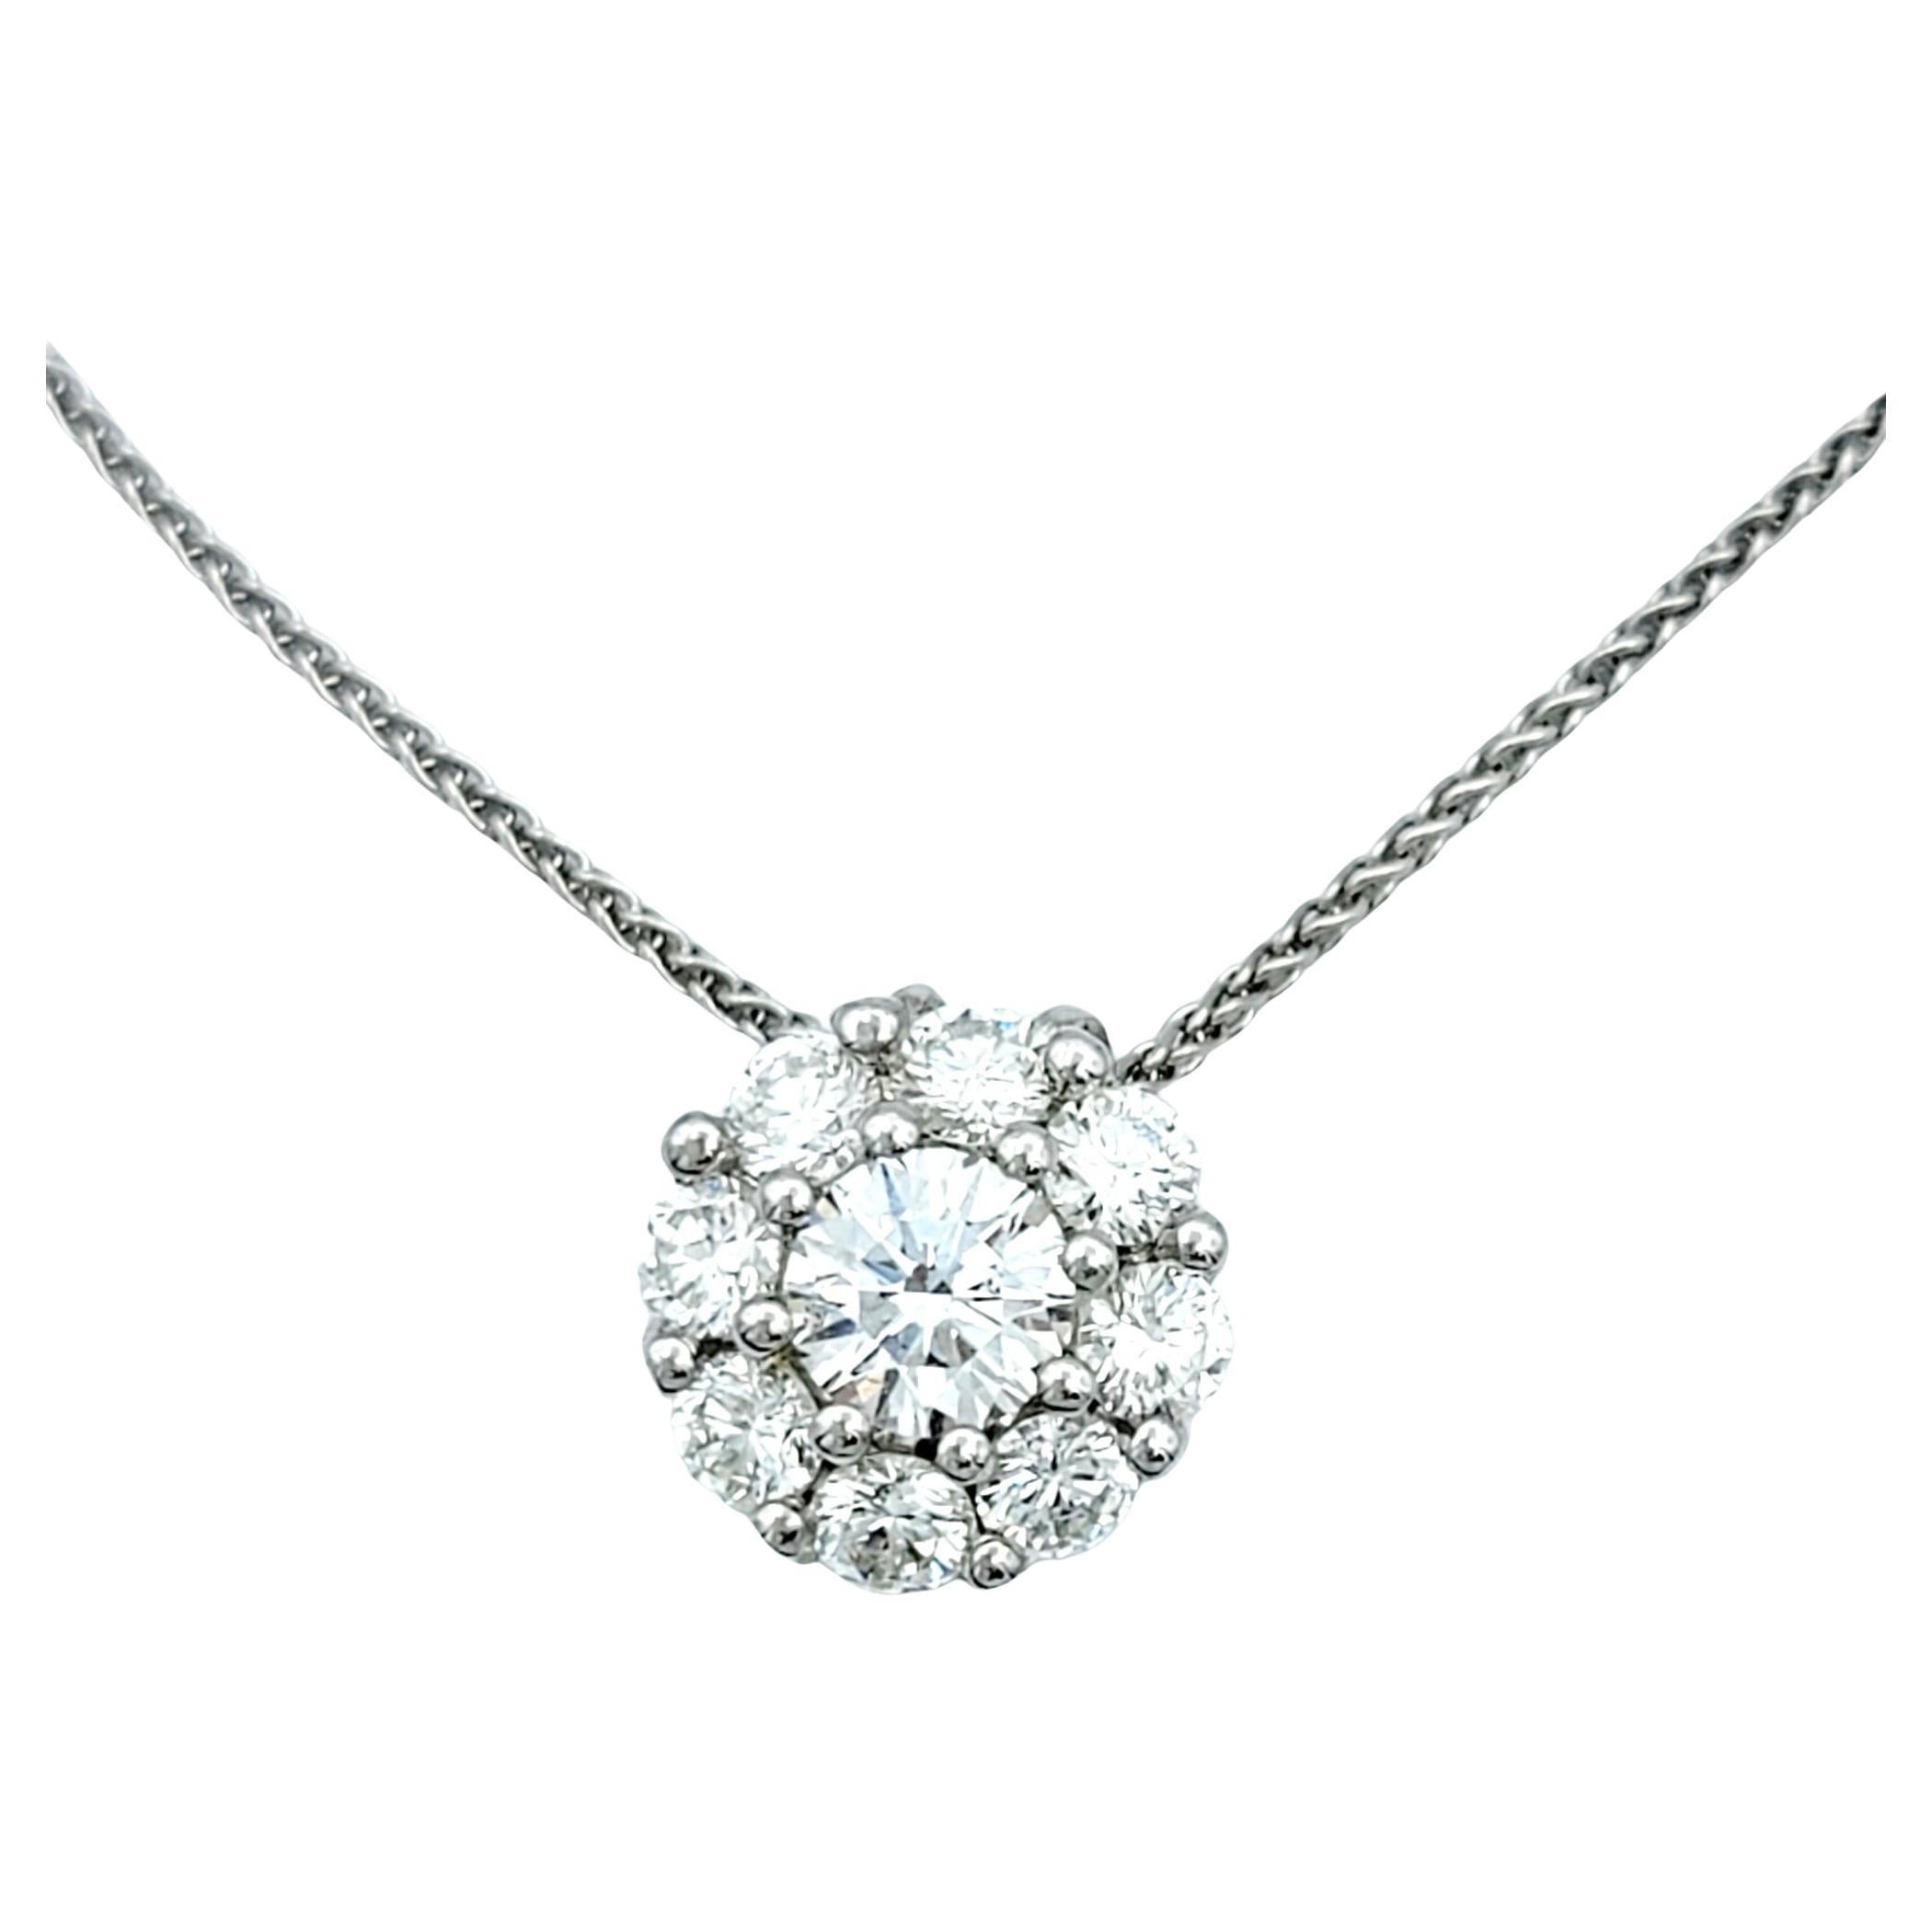 This diamond necklace with its exquisite yet simple design is an absolute marvel. The pendant has a round center diamond, surrounded by smaller halo of round diamonds, creating a beautiful miniature flower-like shape. 

The piece is set in polished